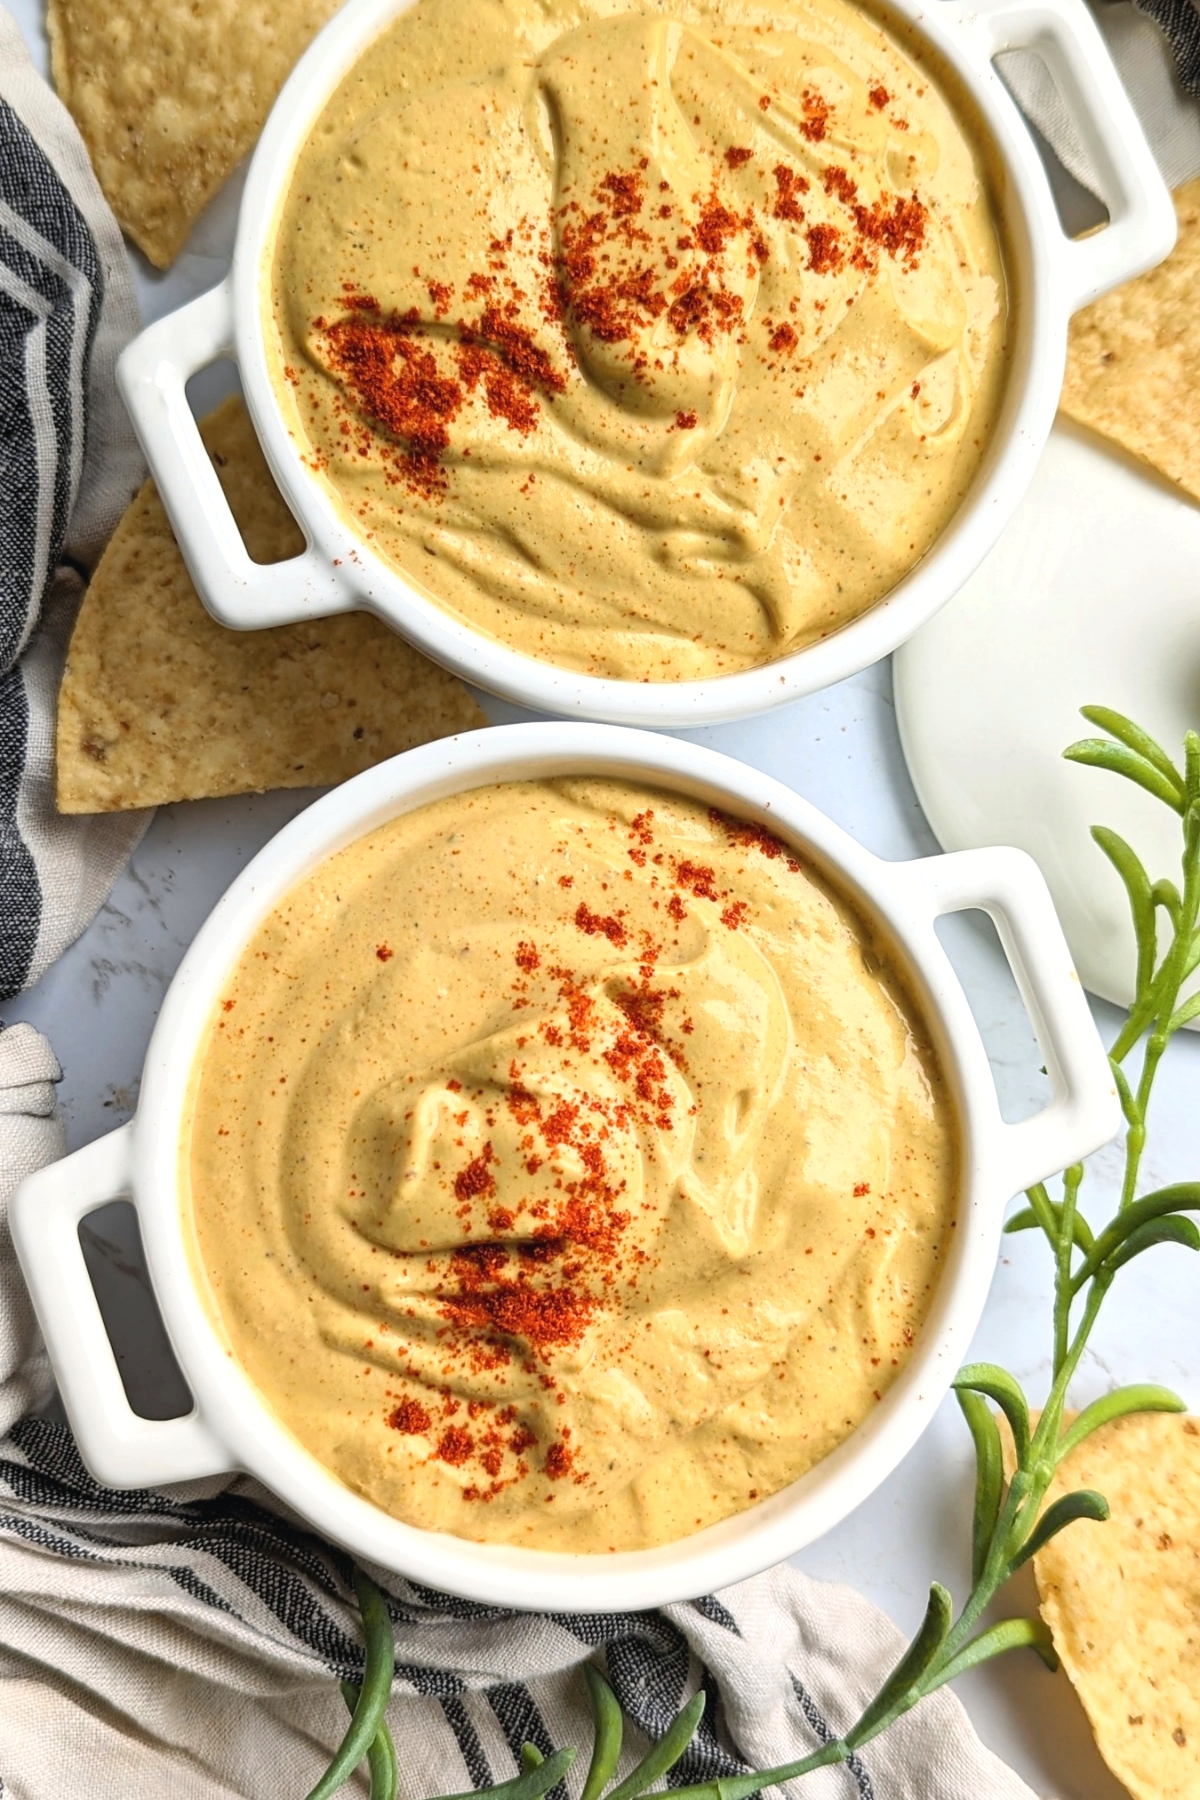 low sodium cheese dip recipe healthy salt free queso without cheese heart healthy dips for tortilla chips or vegetables in a dish with chili powder